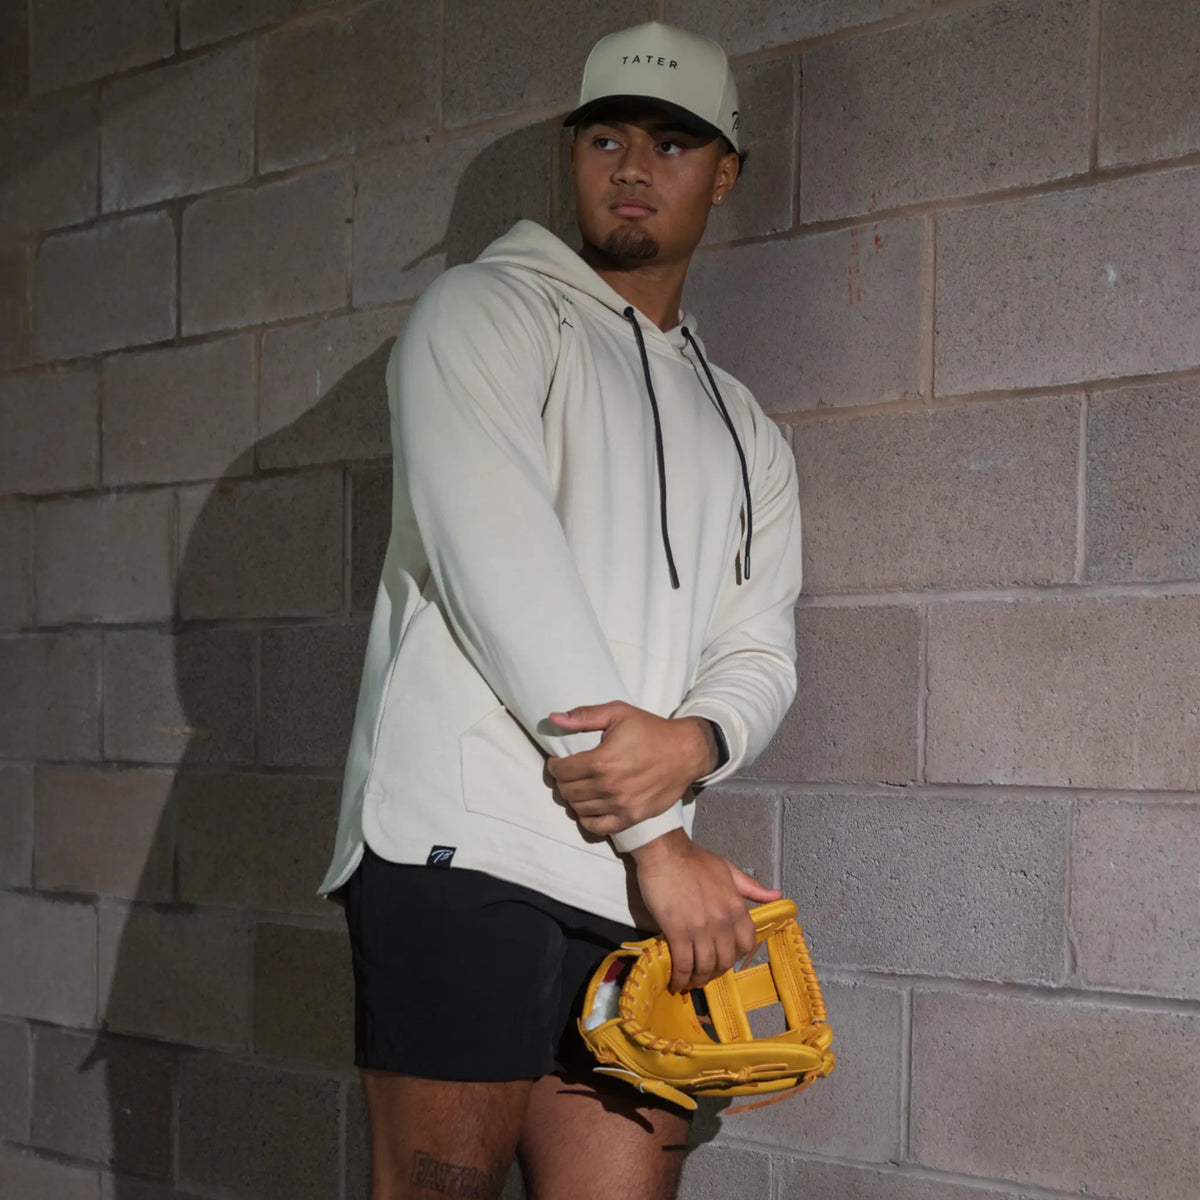 In the photo, a baseball player is wearing a cream-colored TATER-branded hoodie and cap, with a yellow infielder&#39;s glove, showcasing athletic wear suitable for both sports and leisure.